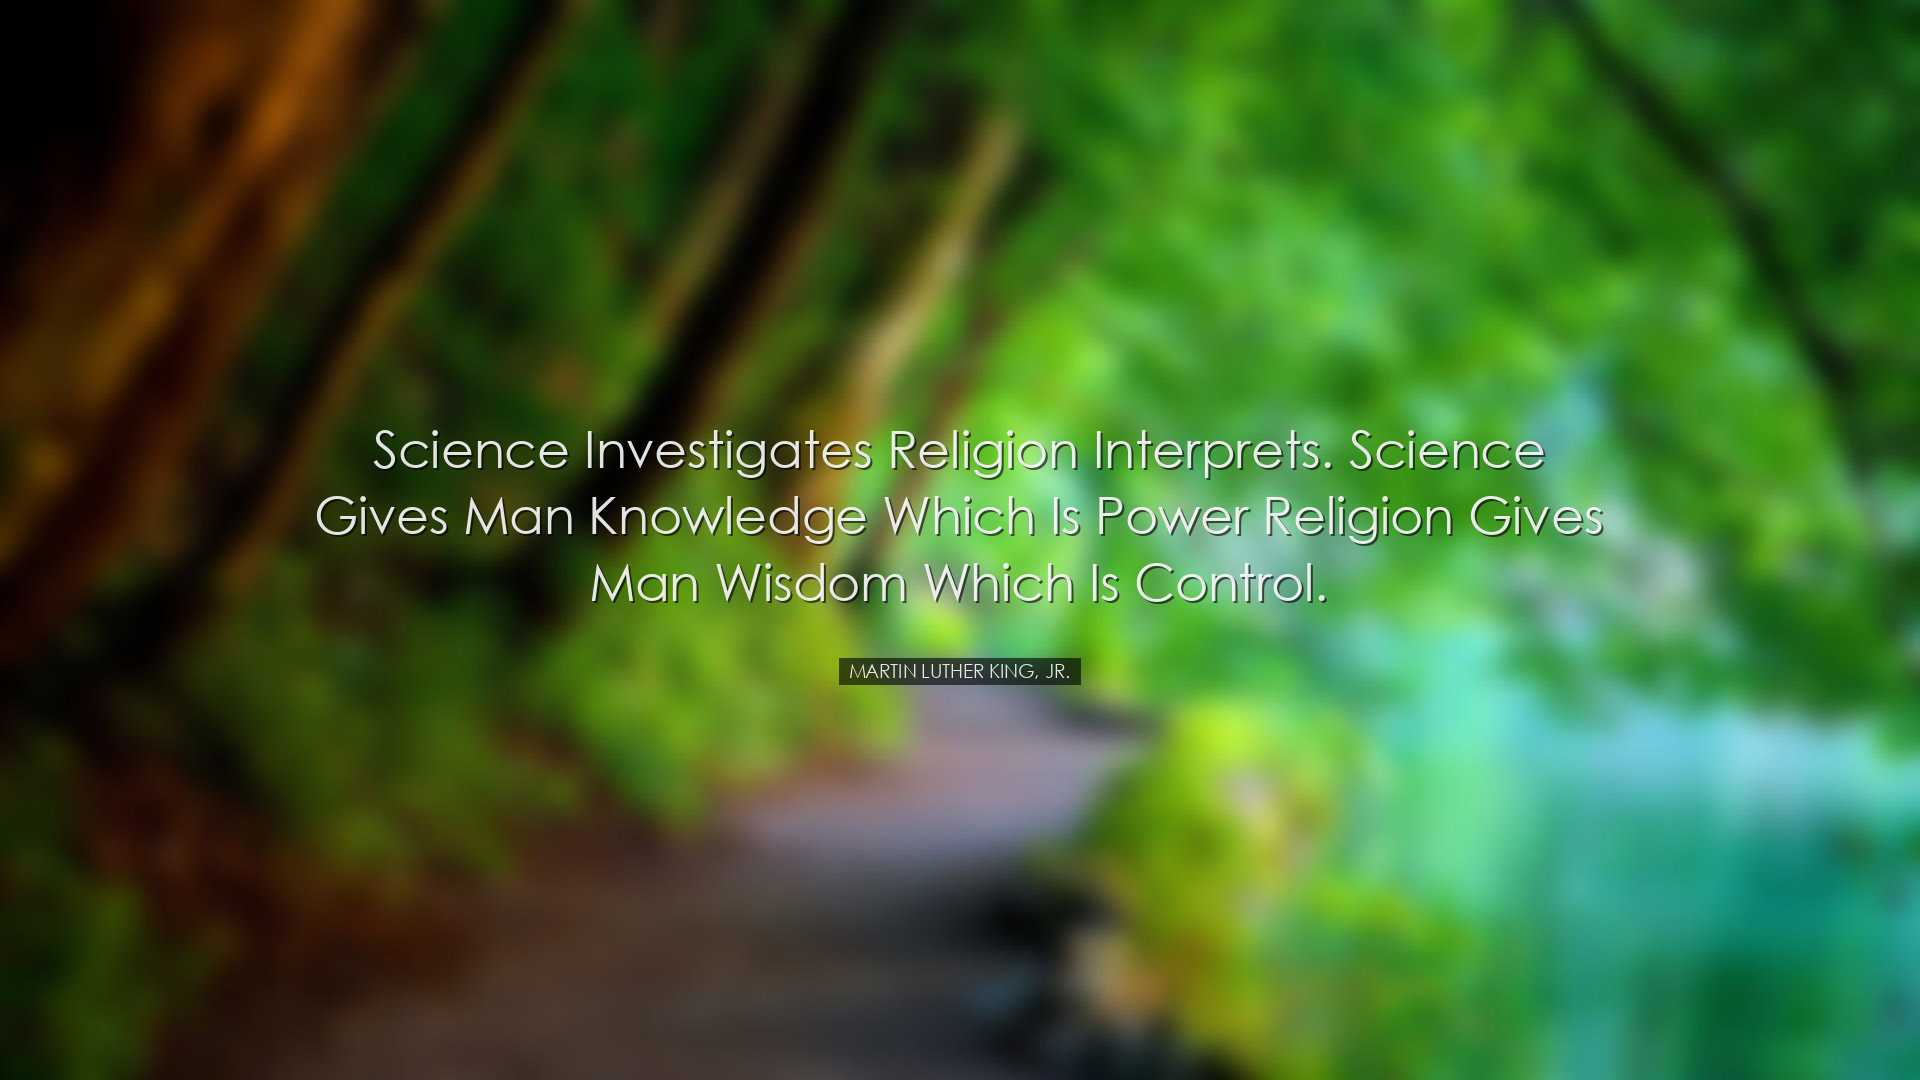 Science investigates religion interprets. Science gives man knowle